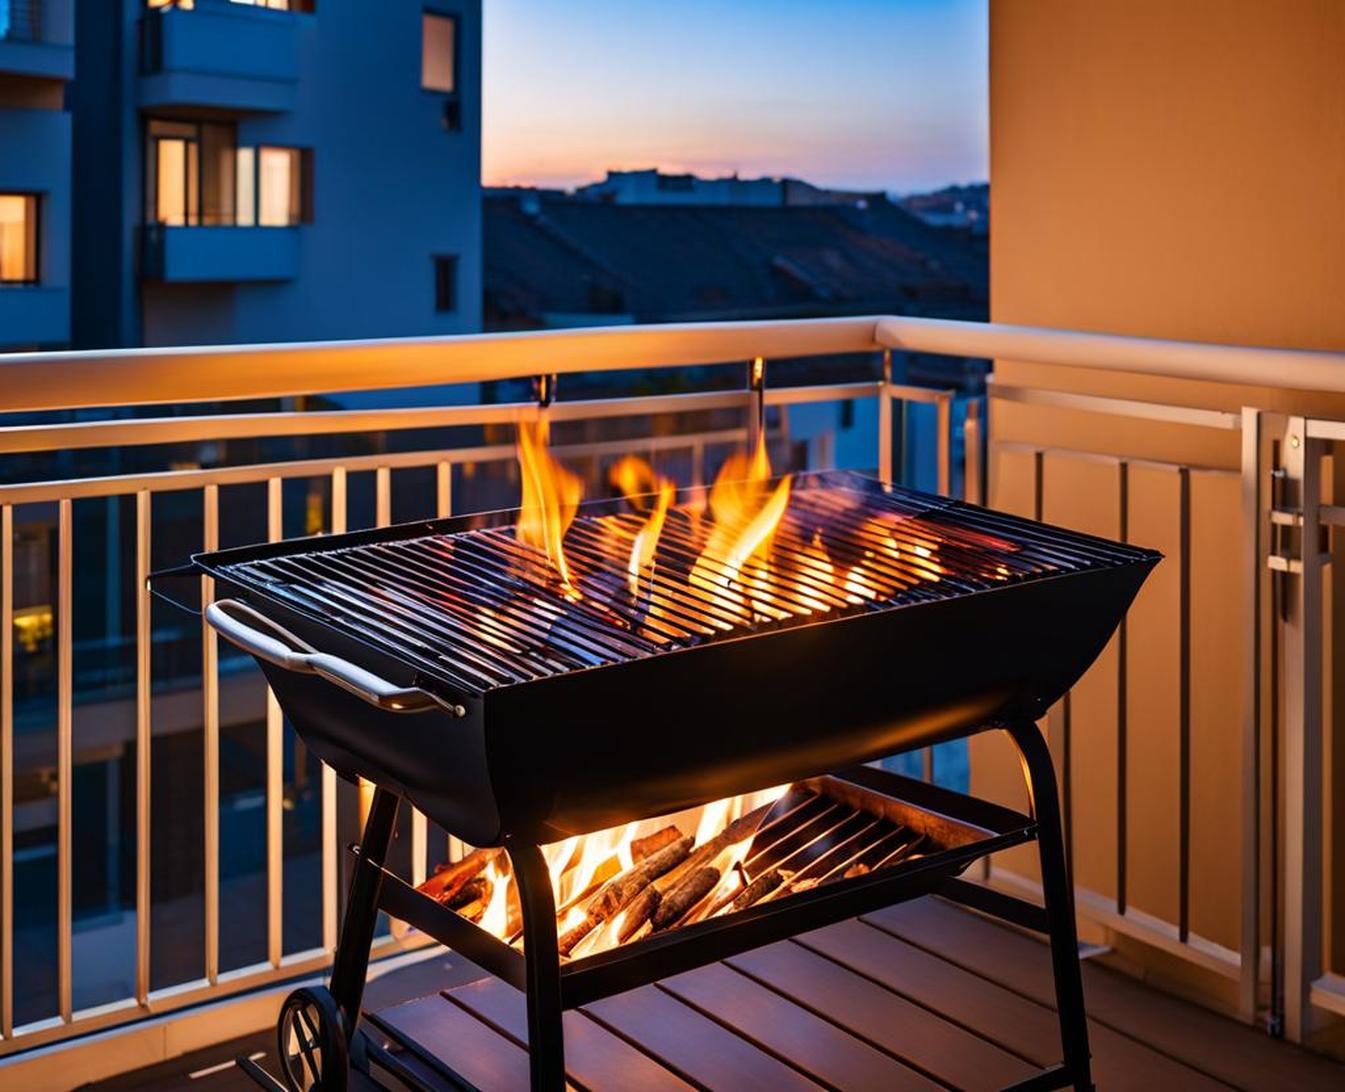 Grilling on Your Balcony? How to Stay Safe and Legal